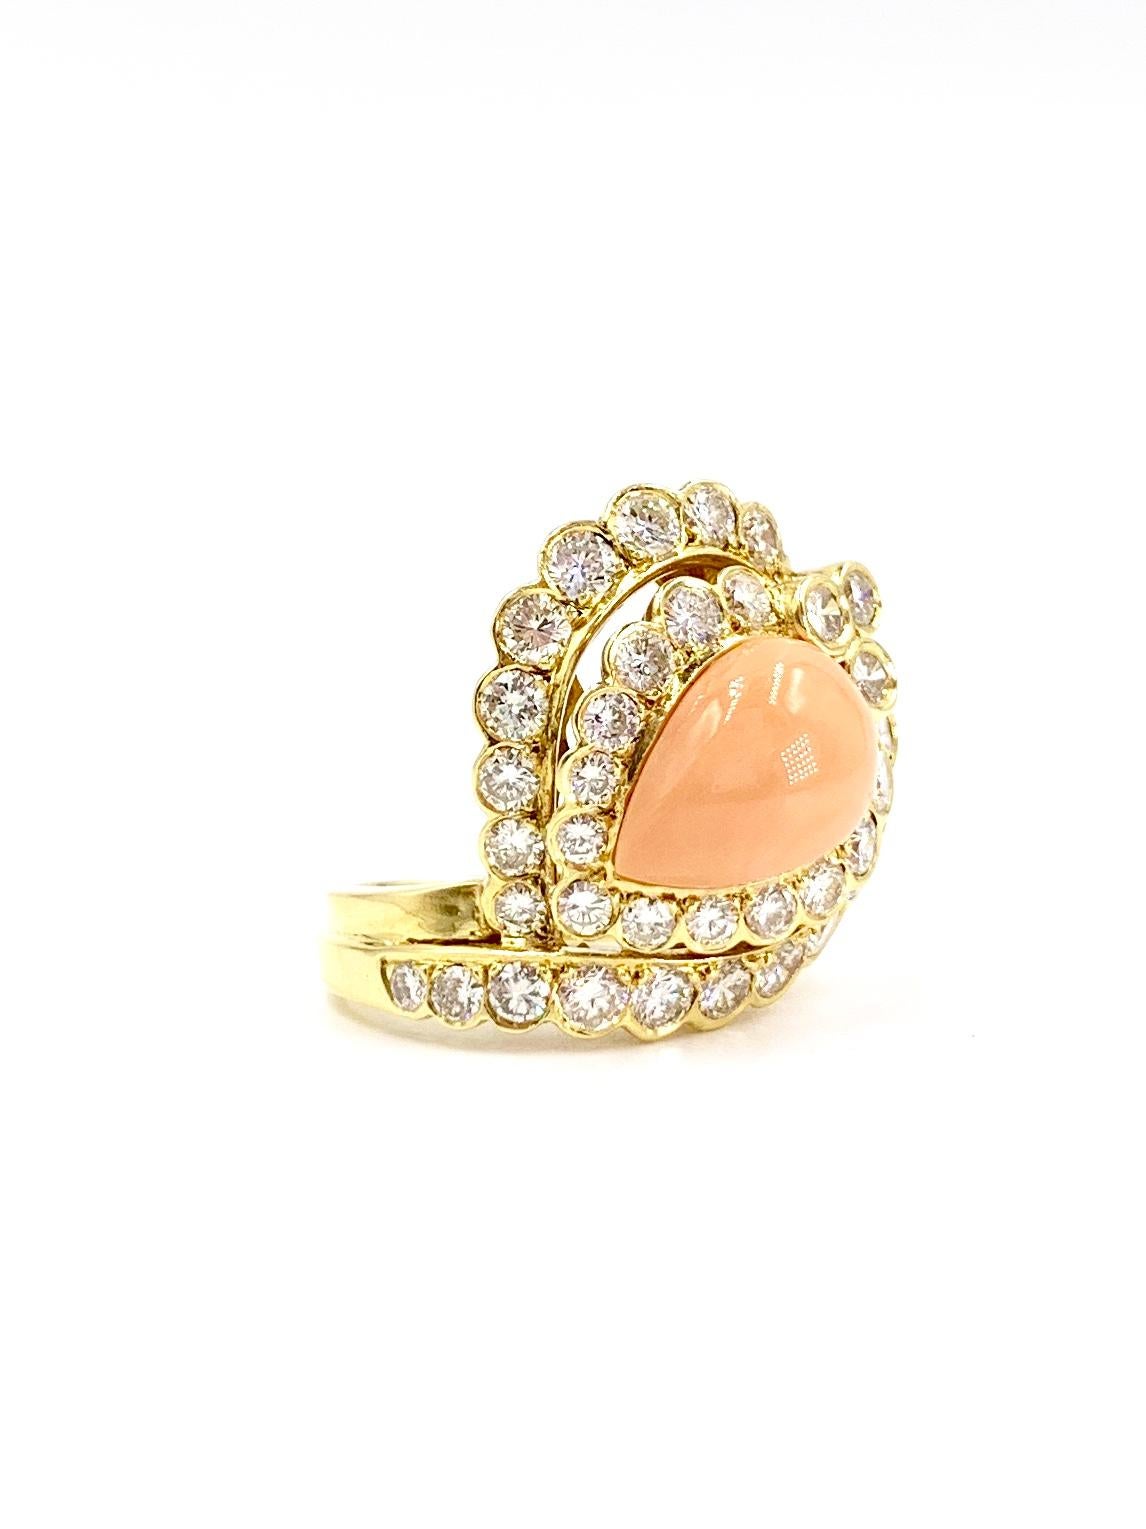 Elegant and sophisticated yet stylish, this well crafted unique 18 karat yellow gold cocktail ring features a well saturated light peachy-pink pear shape coral surrounded by beautifully bezel set round brilliant diamonds. 37 Round brilliant diamonds